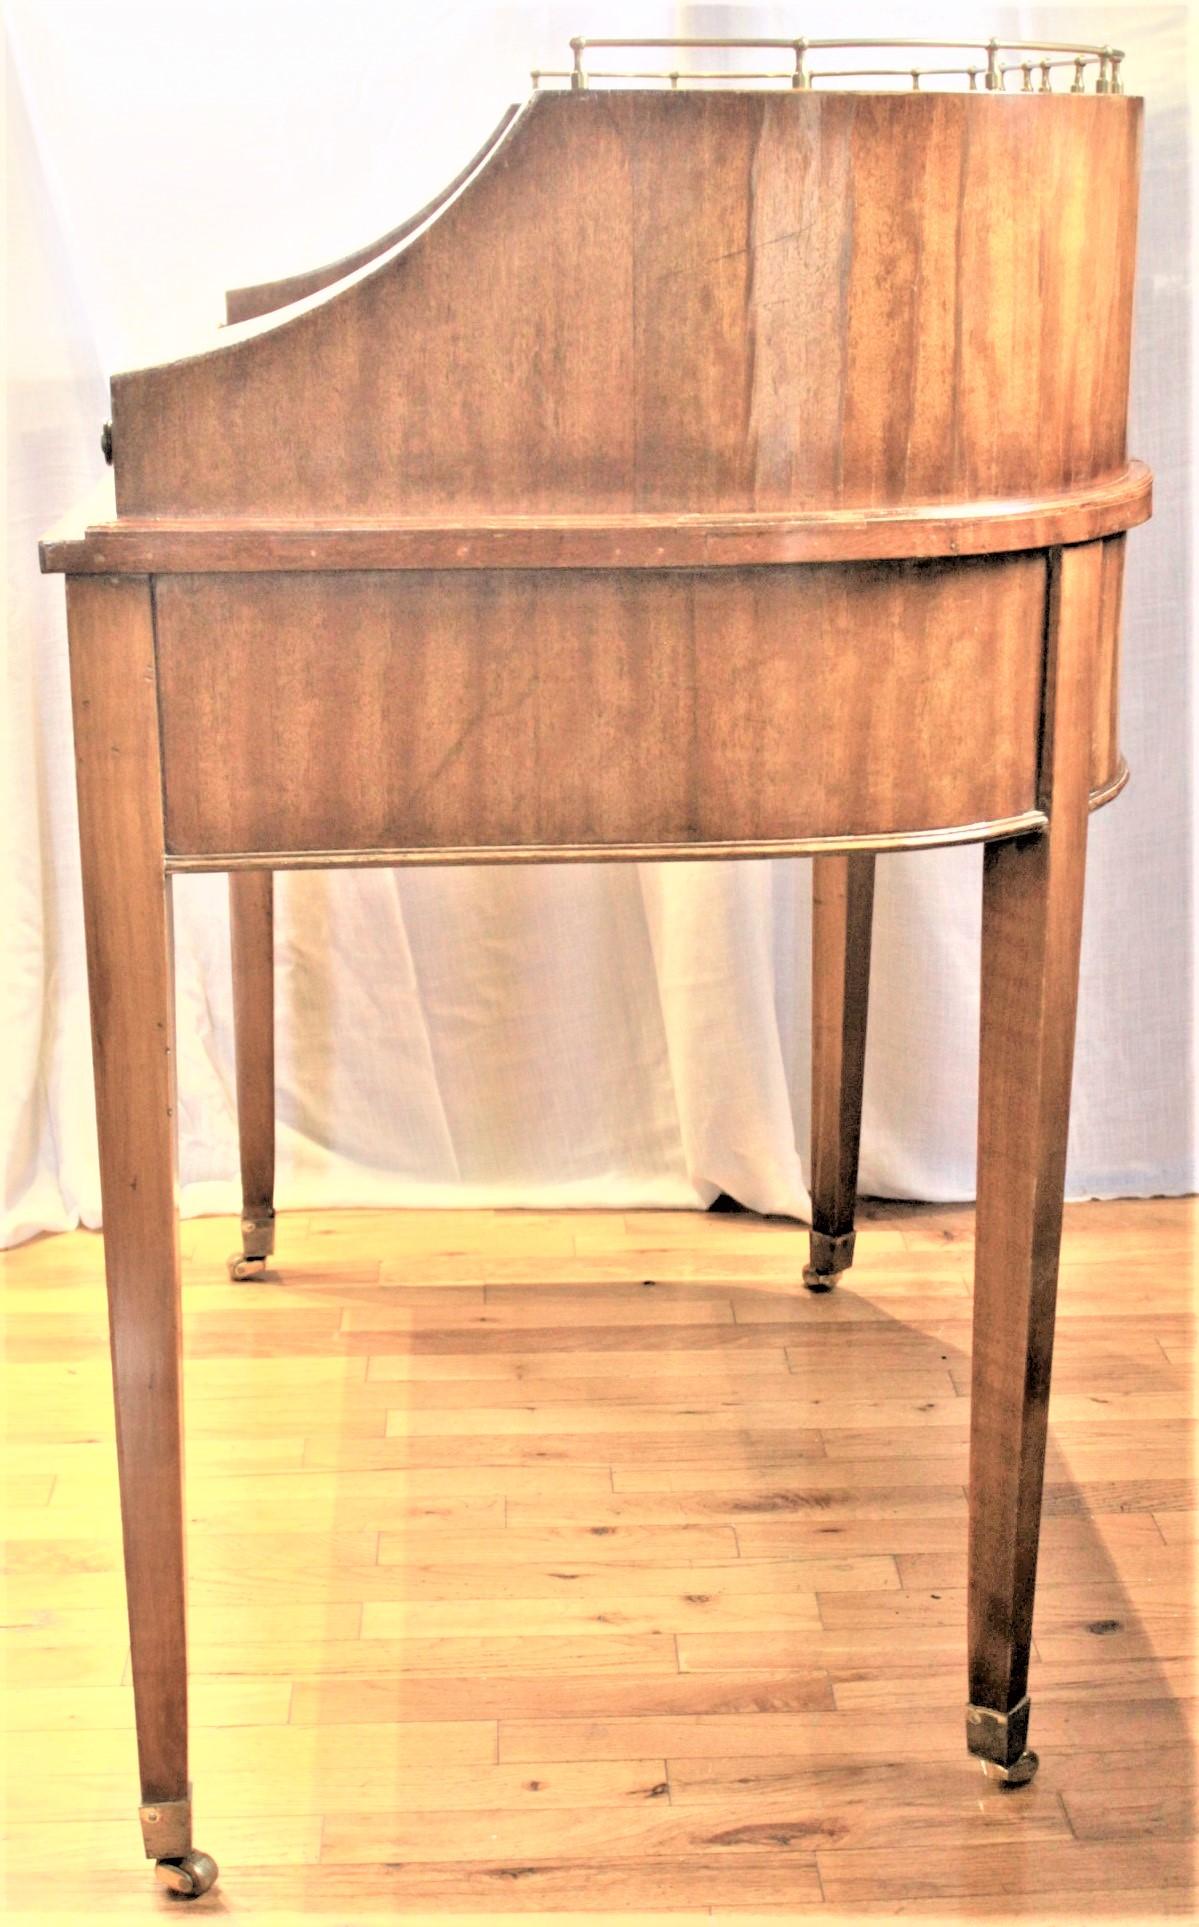 Antique English Carlton House Desk with Marquetry & Brass Accents In Good Condition For Sale In Hamilton, Ontario